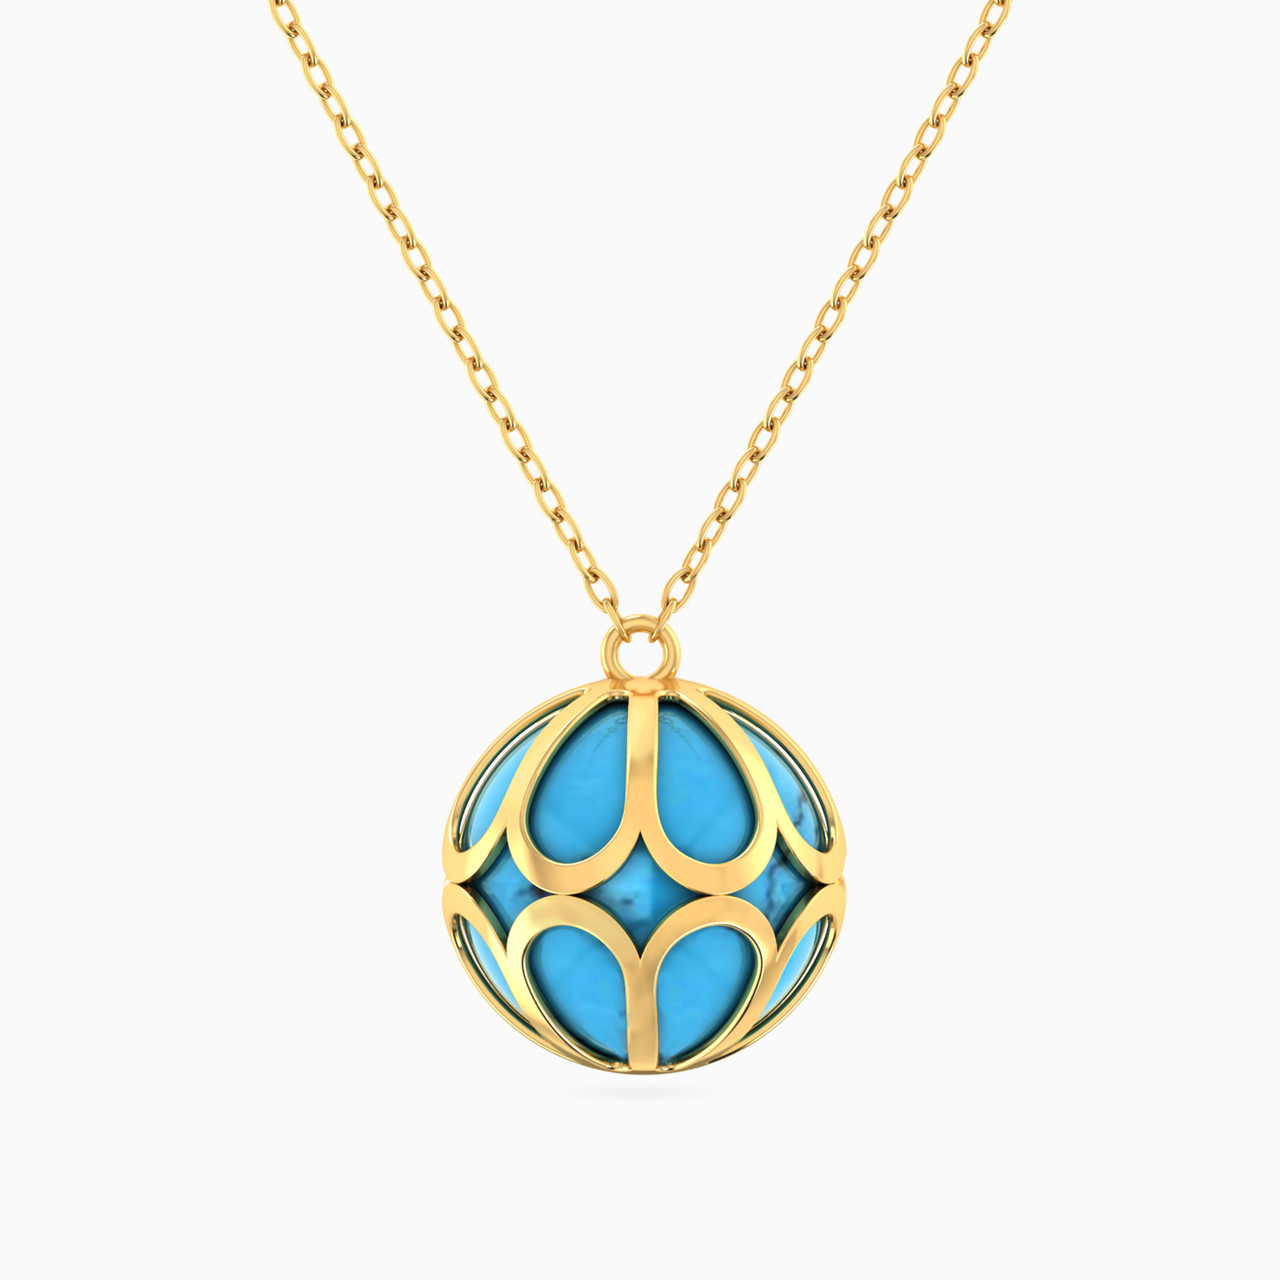 Sphere Shaped Colored Stones Pendant with 18K Gold Chain